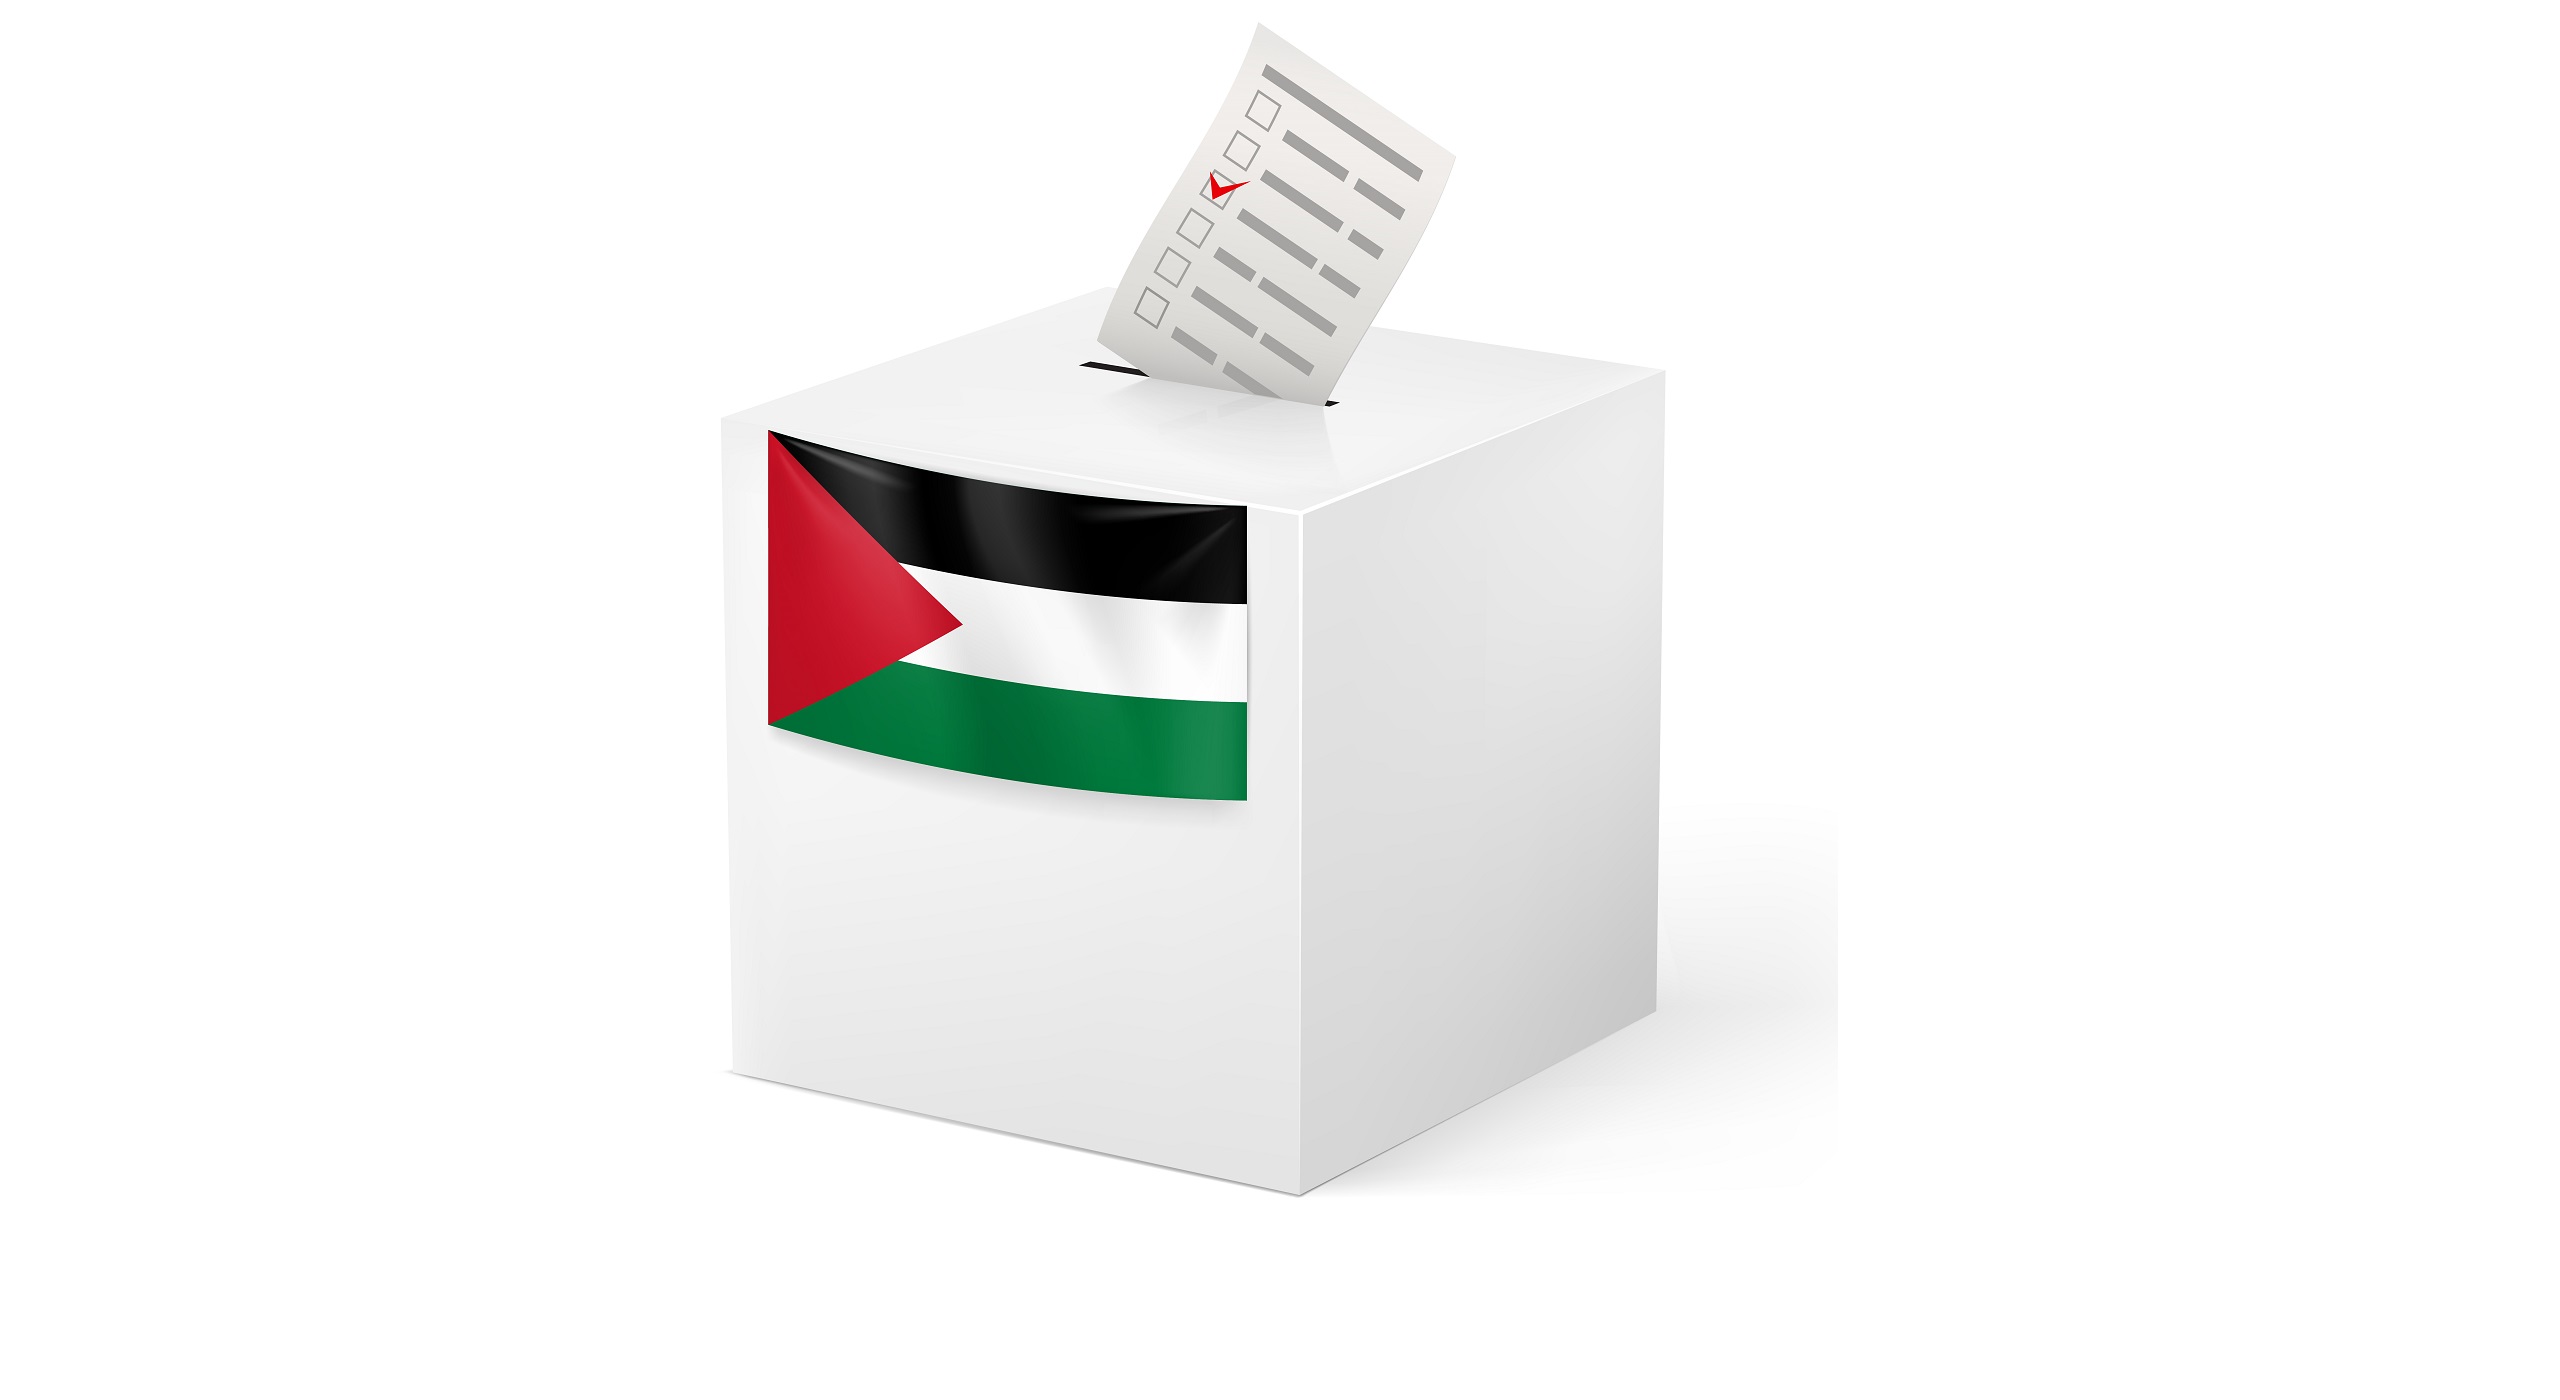 No Voter Apathy Seen in Palestinian Elections